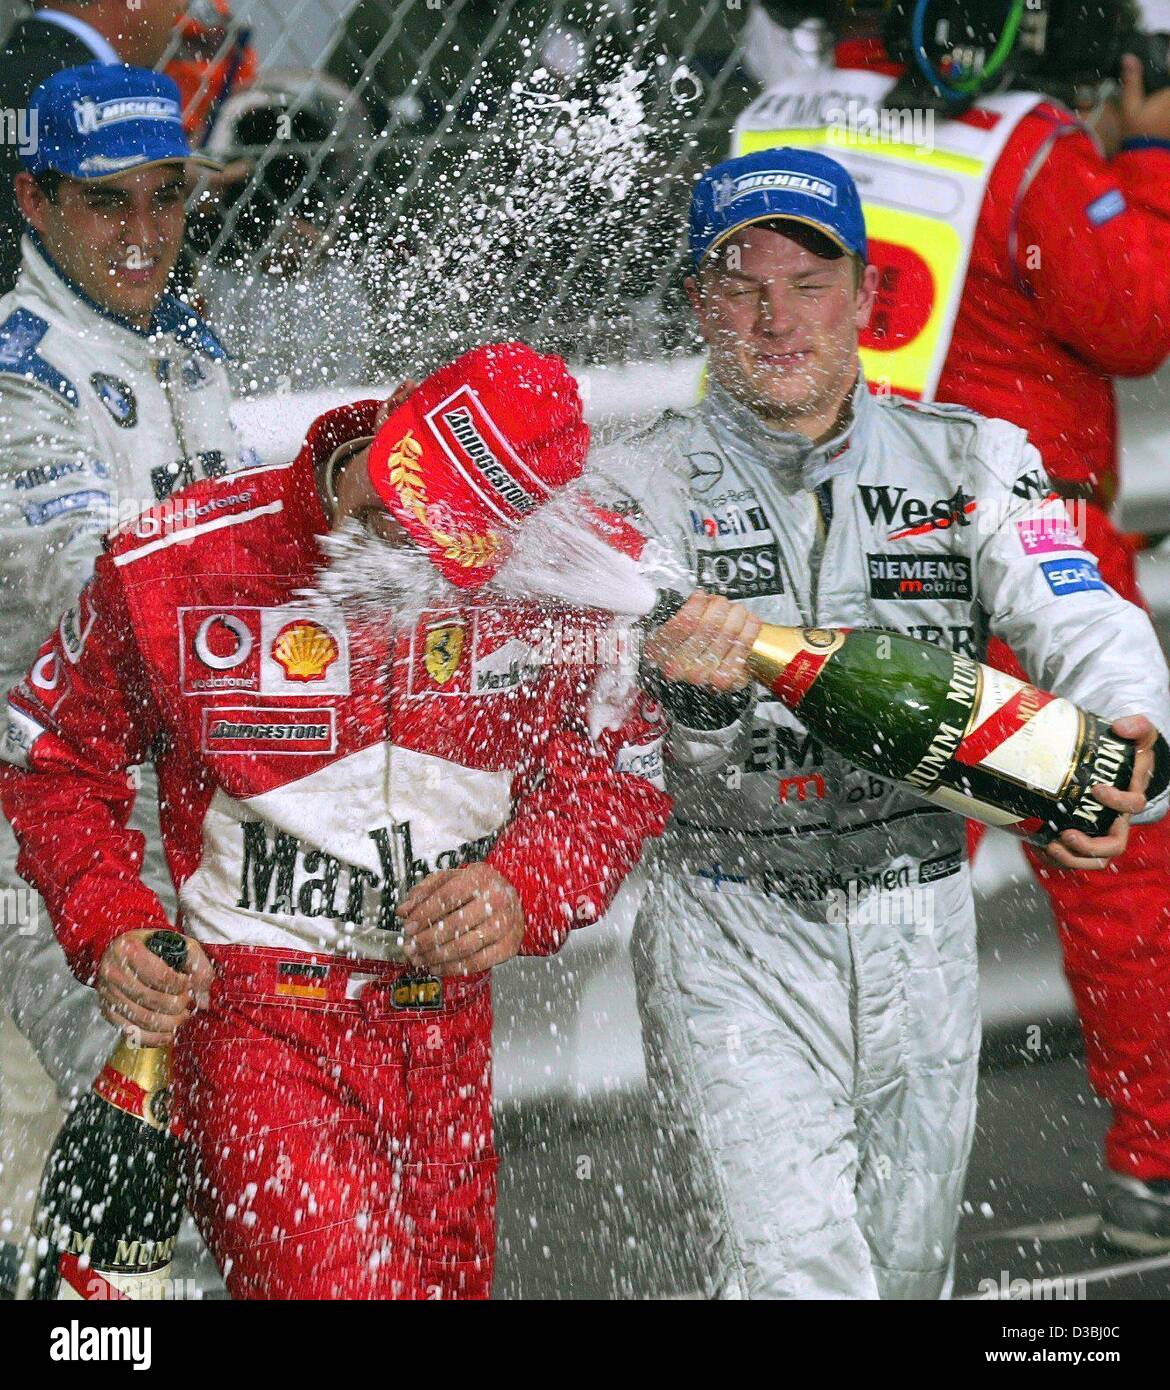 (dpa) - The three first-placed winners of the formula one Grand Prix of Monaco celebrate with champagne in Monte Carlo, 1 June 2003. Colombian Juan Pablo Montoya of BMW Williams (back) takes first place, Finnish Kimi Raekkoenen (R, McLaren Mercedes) finishes second and German world champion Michael  Stock Photo